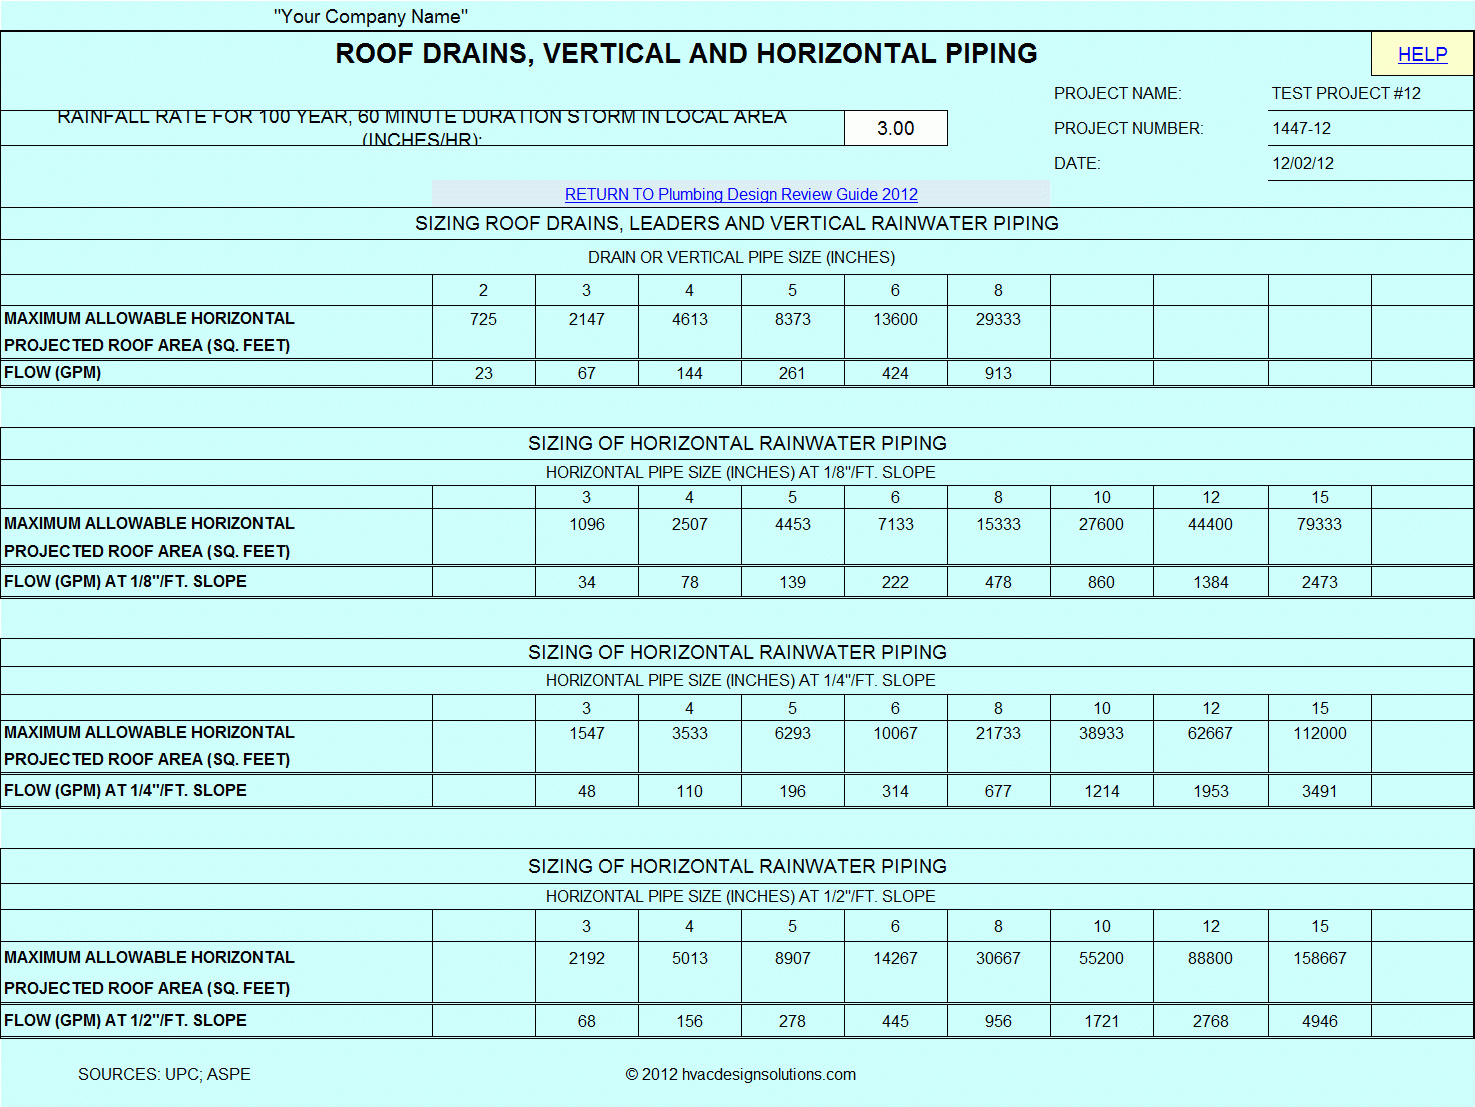 Storm Drain Pipe Sizing Spreadsheet Pertaining To Plumbing Design Review Guide 2012